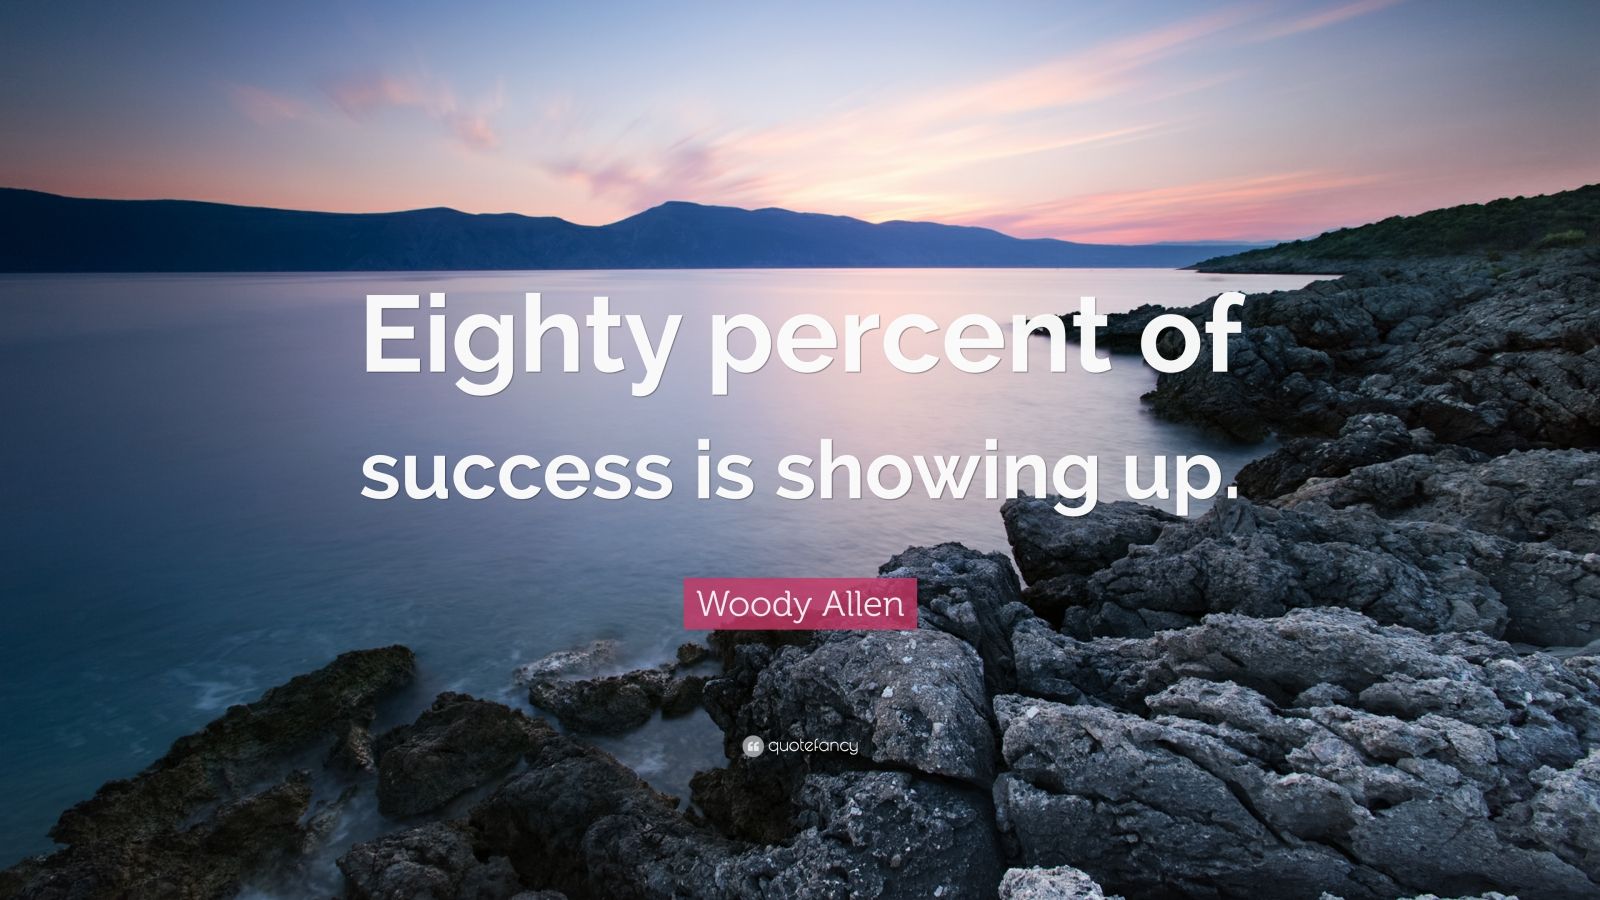 Woody Allen Quote “eighty Percent Of Success Is Showing Up” 23 Wallpapers Quotefancy 2747